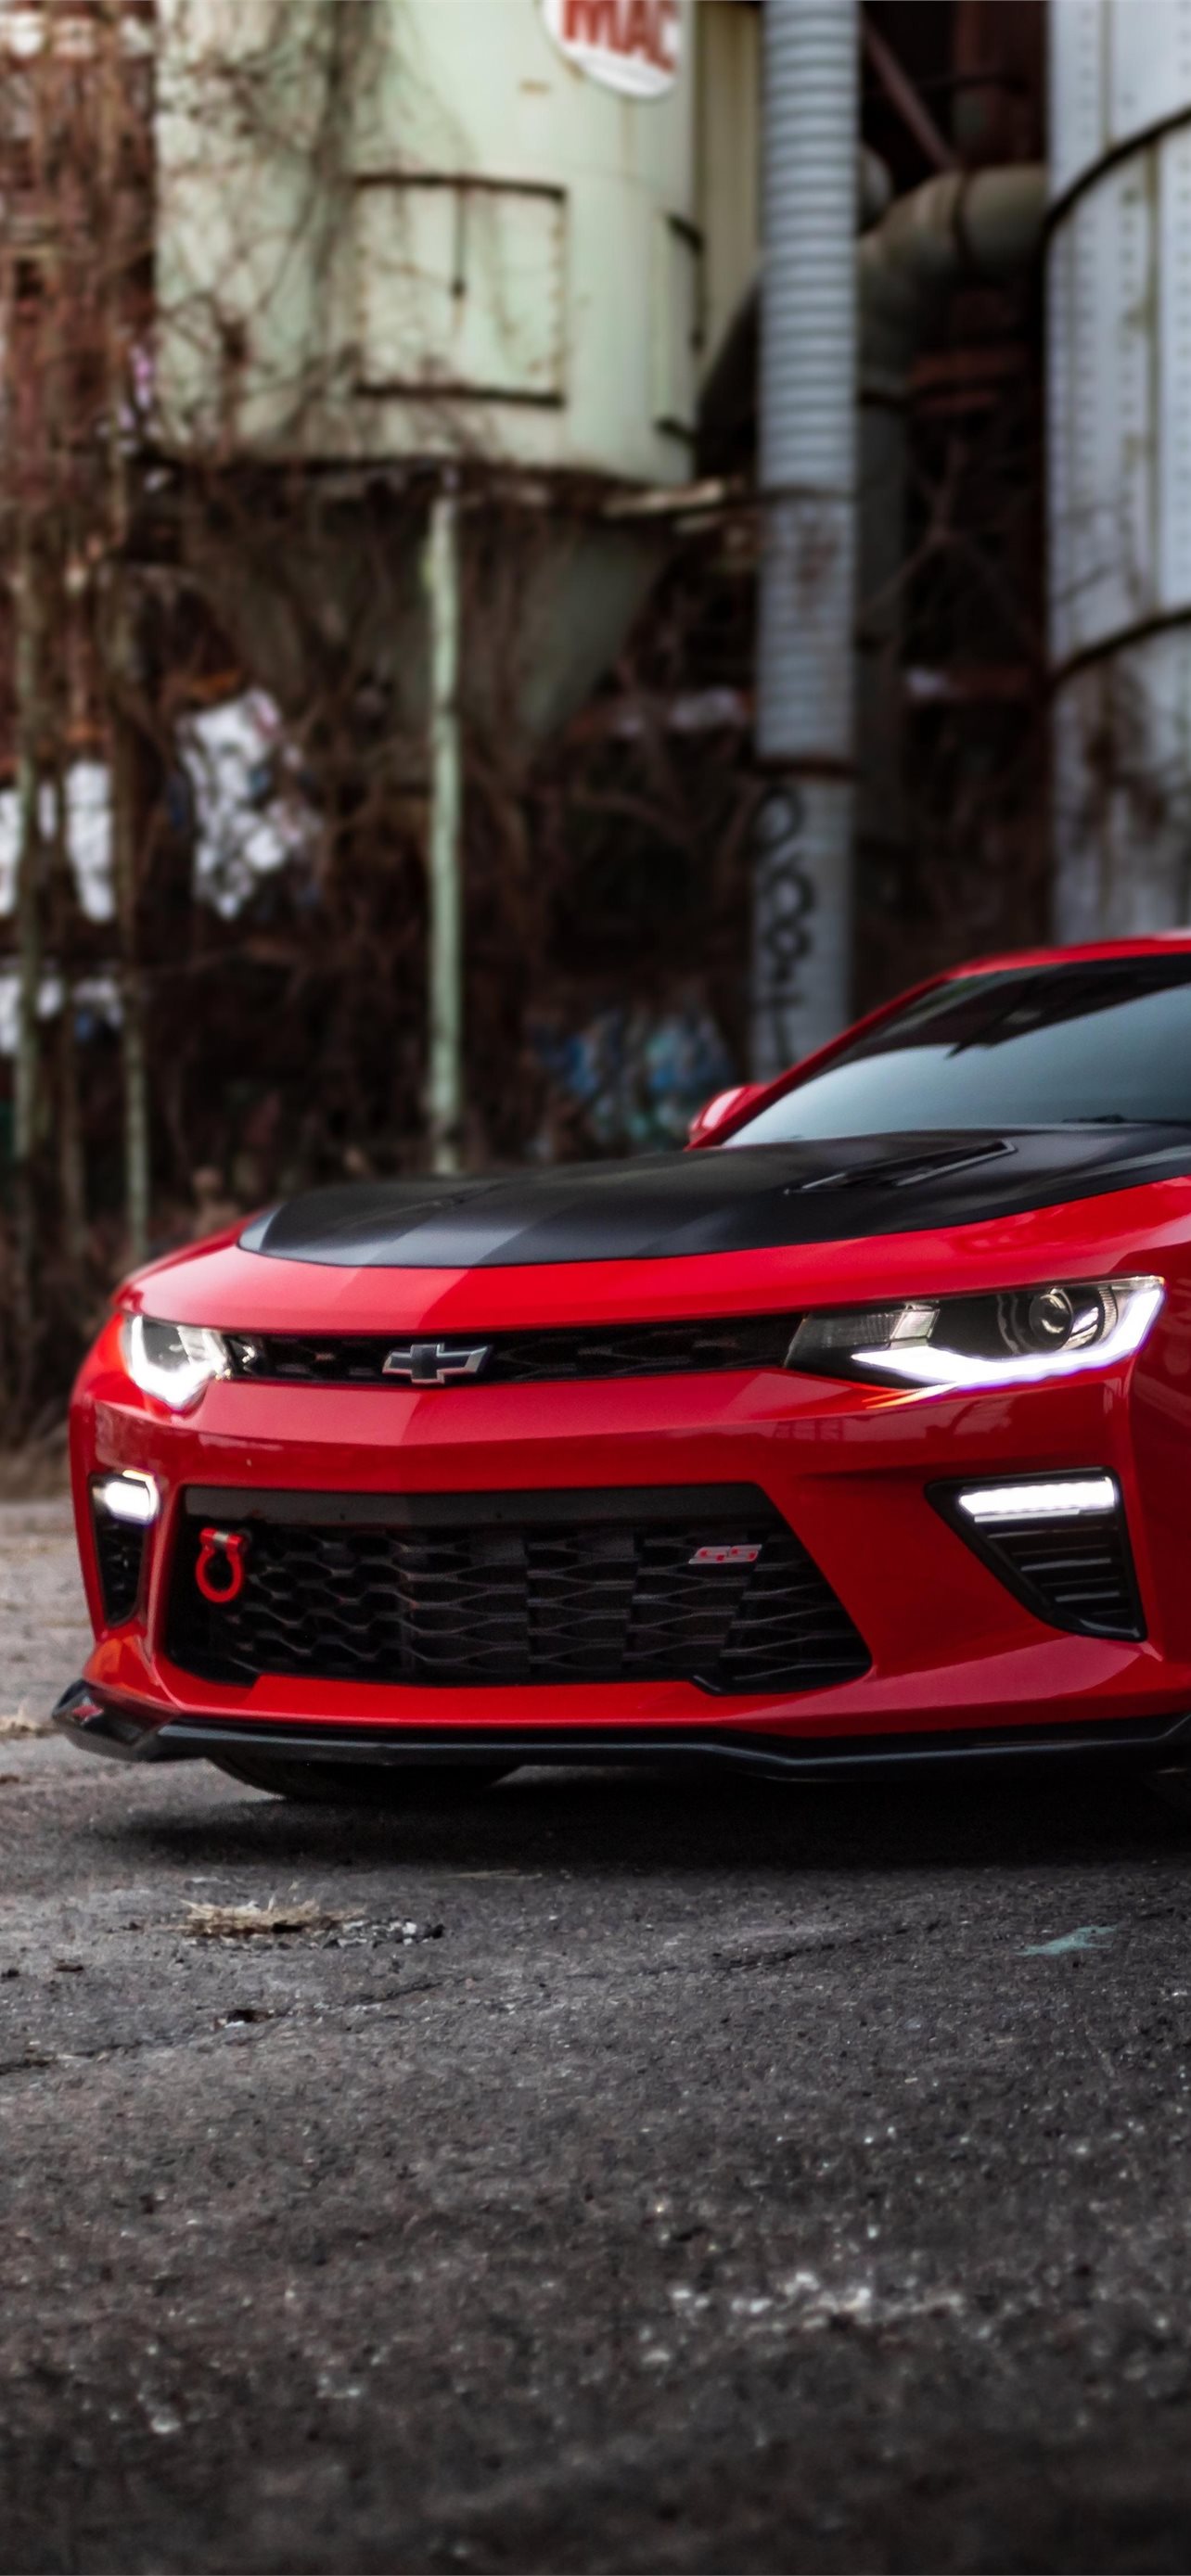 2018 Camaro ZL1 1LE car chevy muscle track v8 HD phone wallpaper   Peakpx